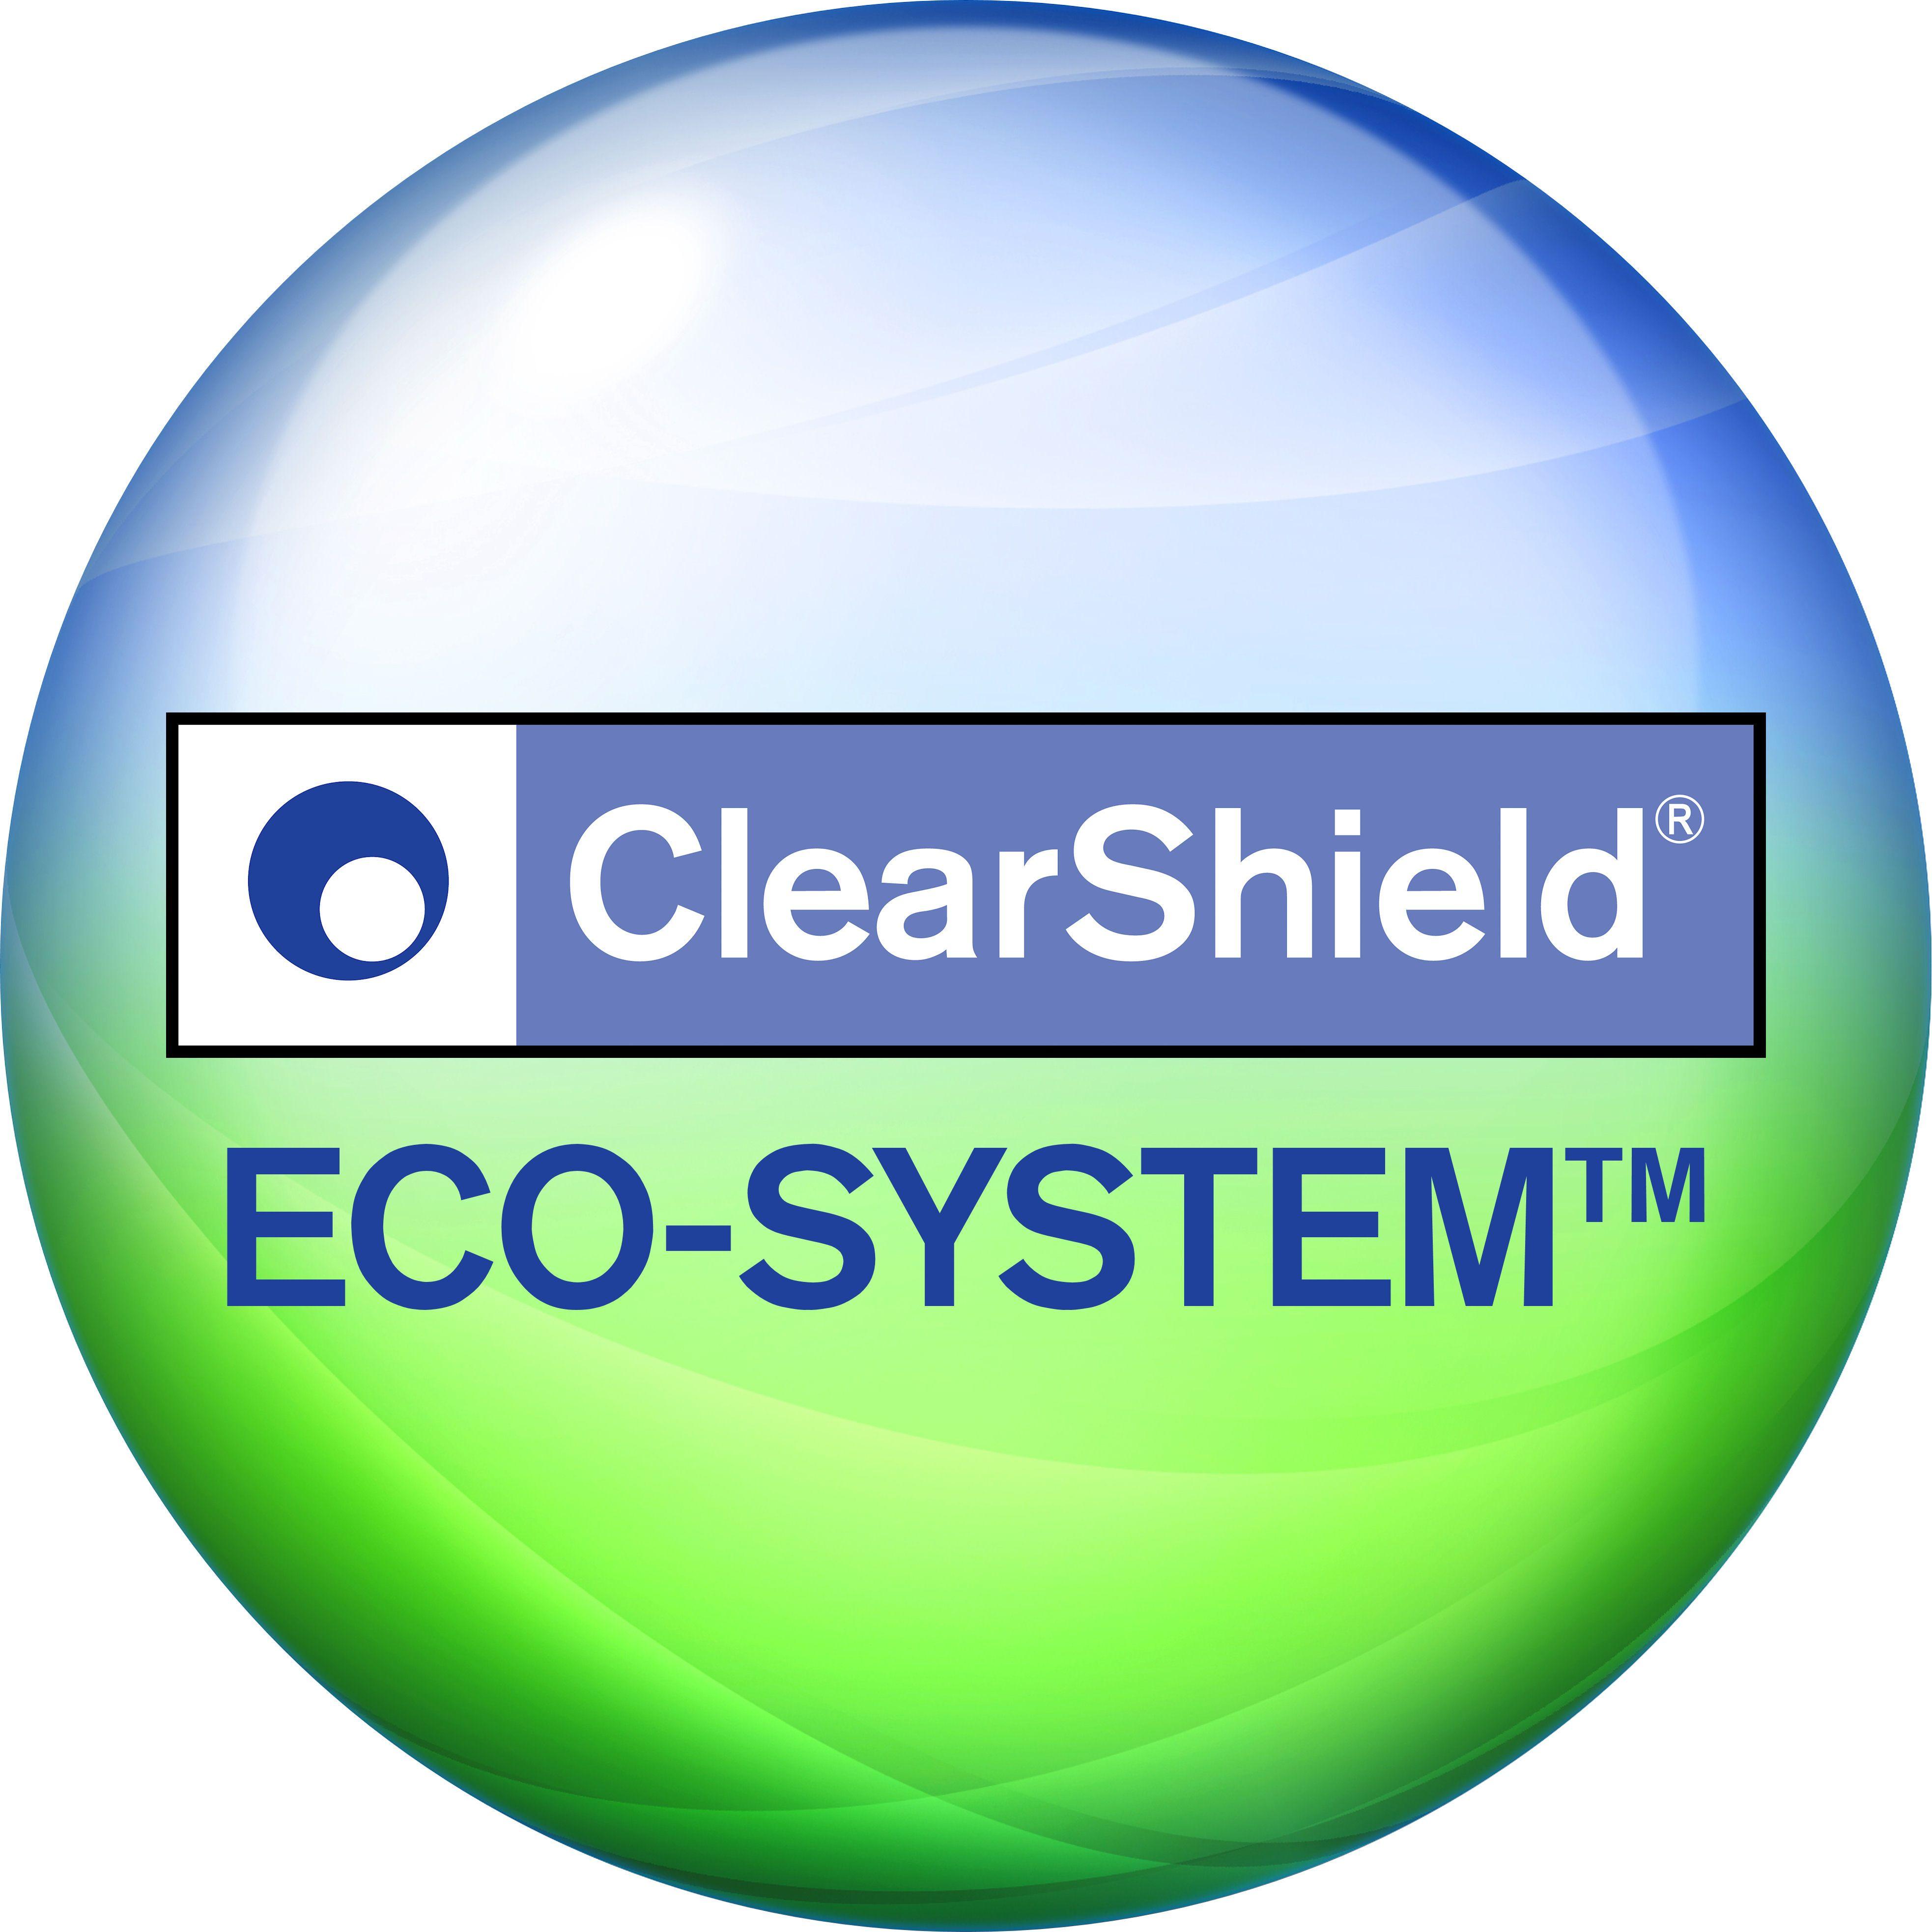 Clear Shield Logo - Easy Clean Showers. United States. ClearShield Technologies, LLC